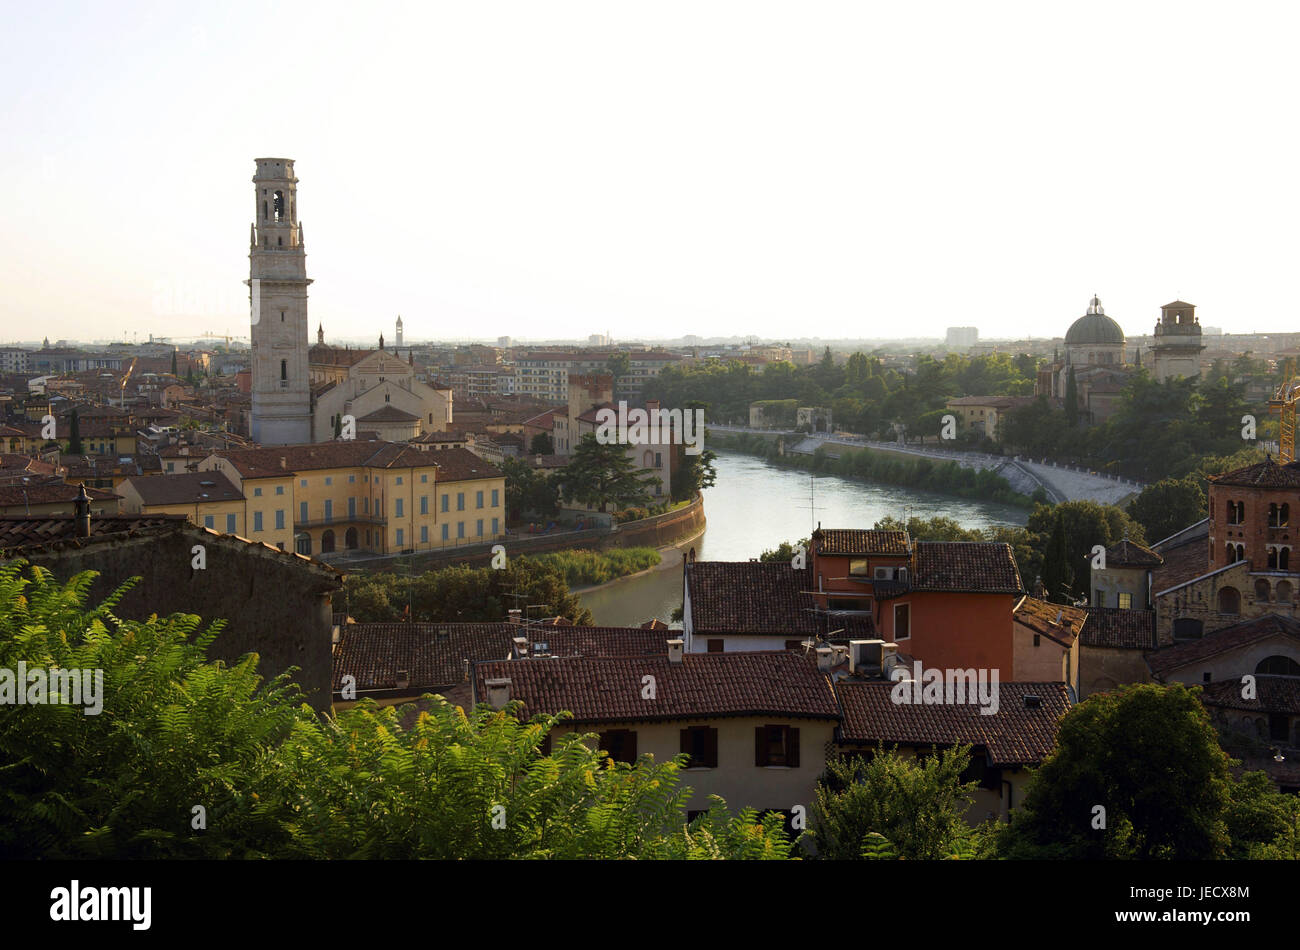 Italy, Veneto, Verona, town view with cathedral and flux, Stock Photo